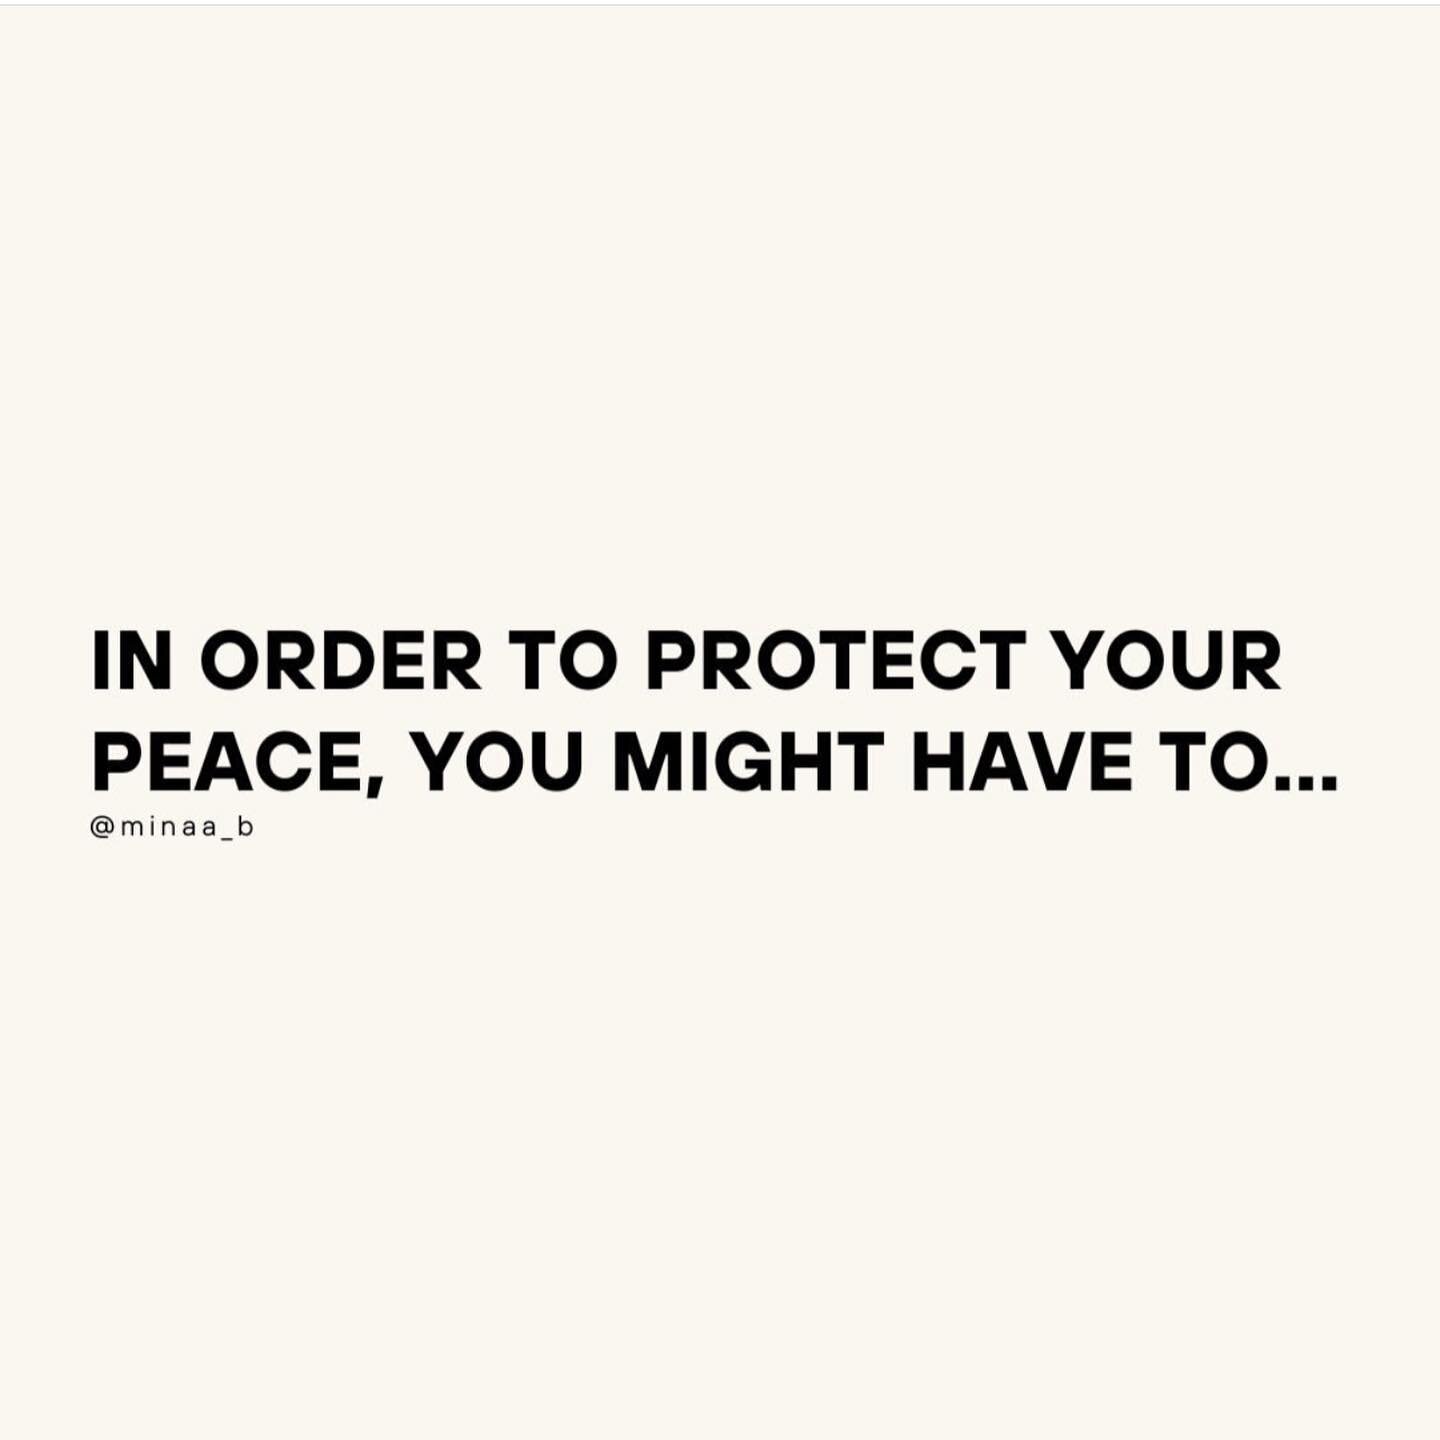 Protecting your peace requires you to date boundaries with yourself. You have to be willing to acknowledge what you will tolerate and what you will not. 

How are you protecting your peace today?

#mindflwithminaa 
-
My book, Owning Our Struggles, is